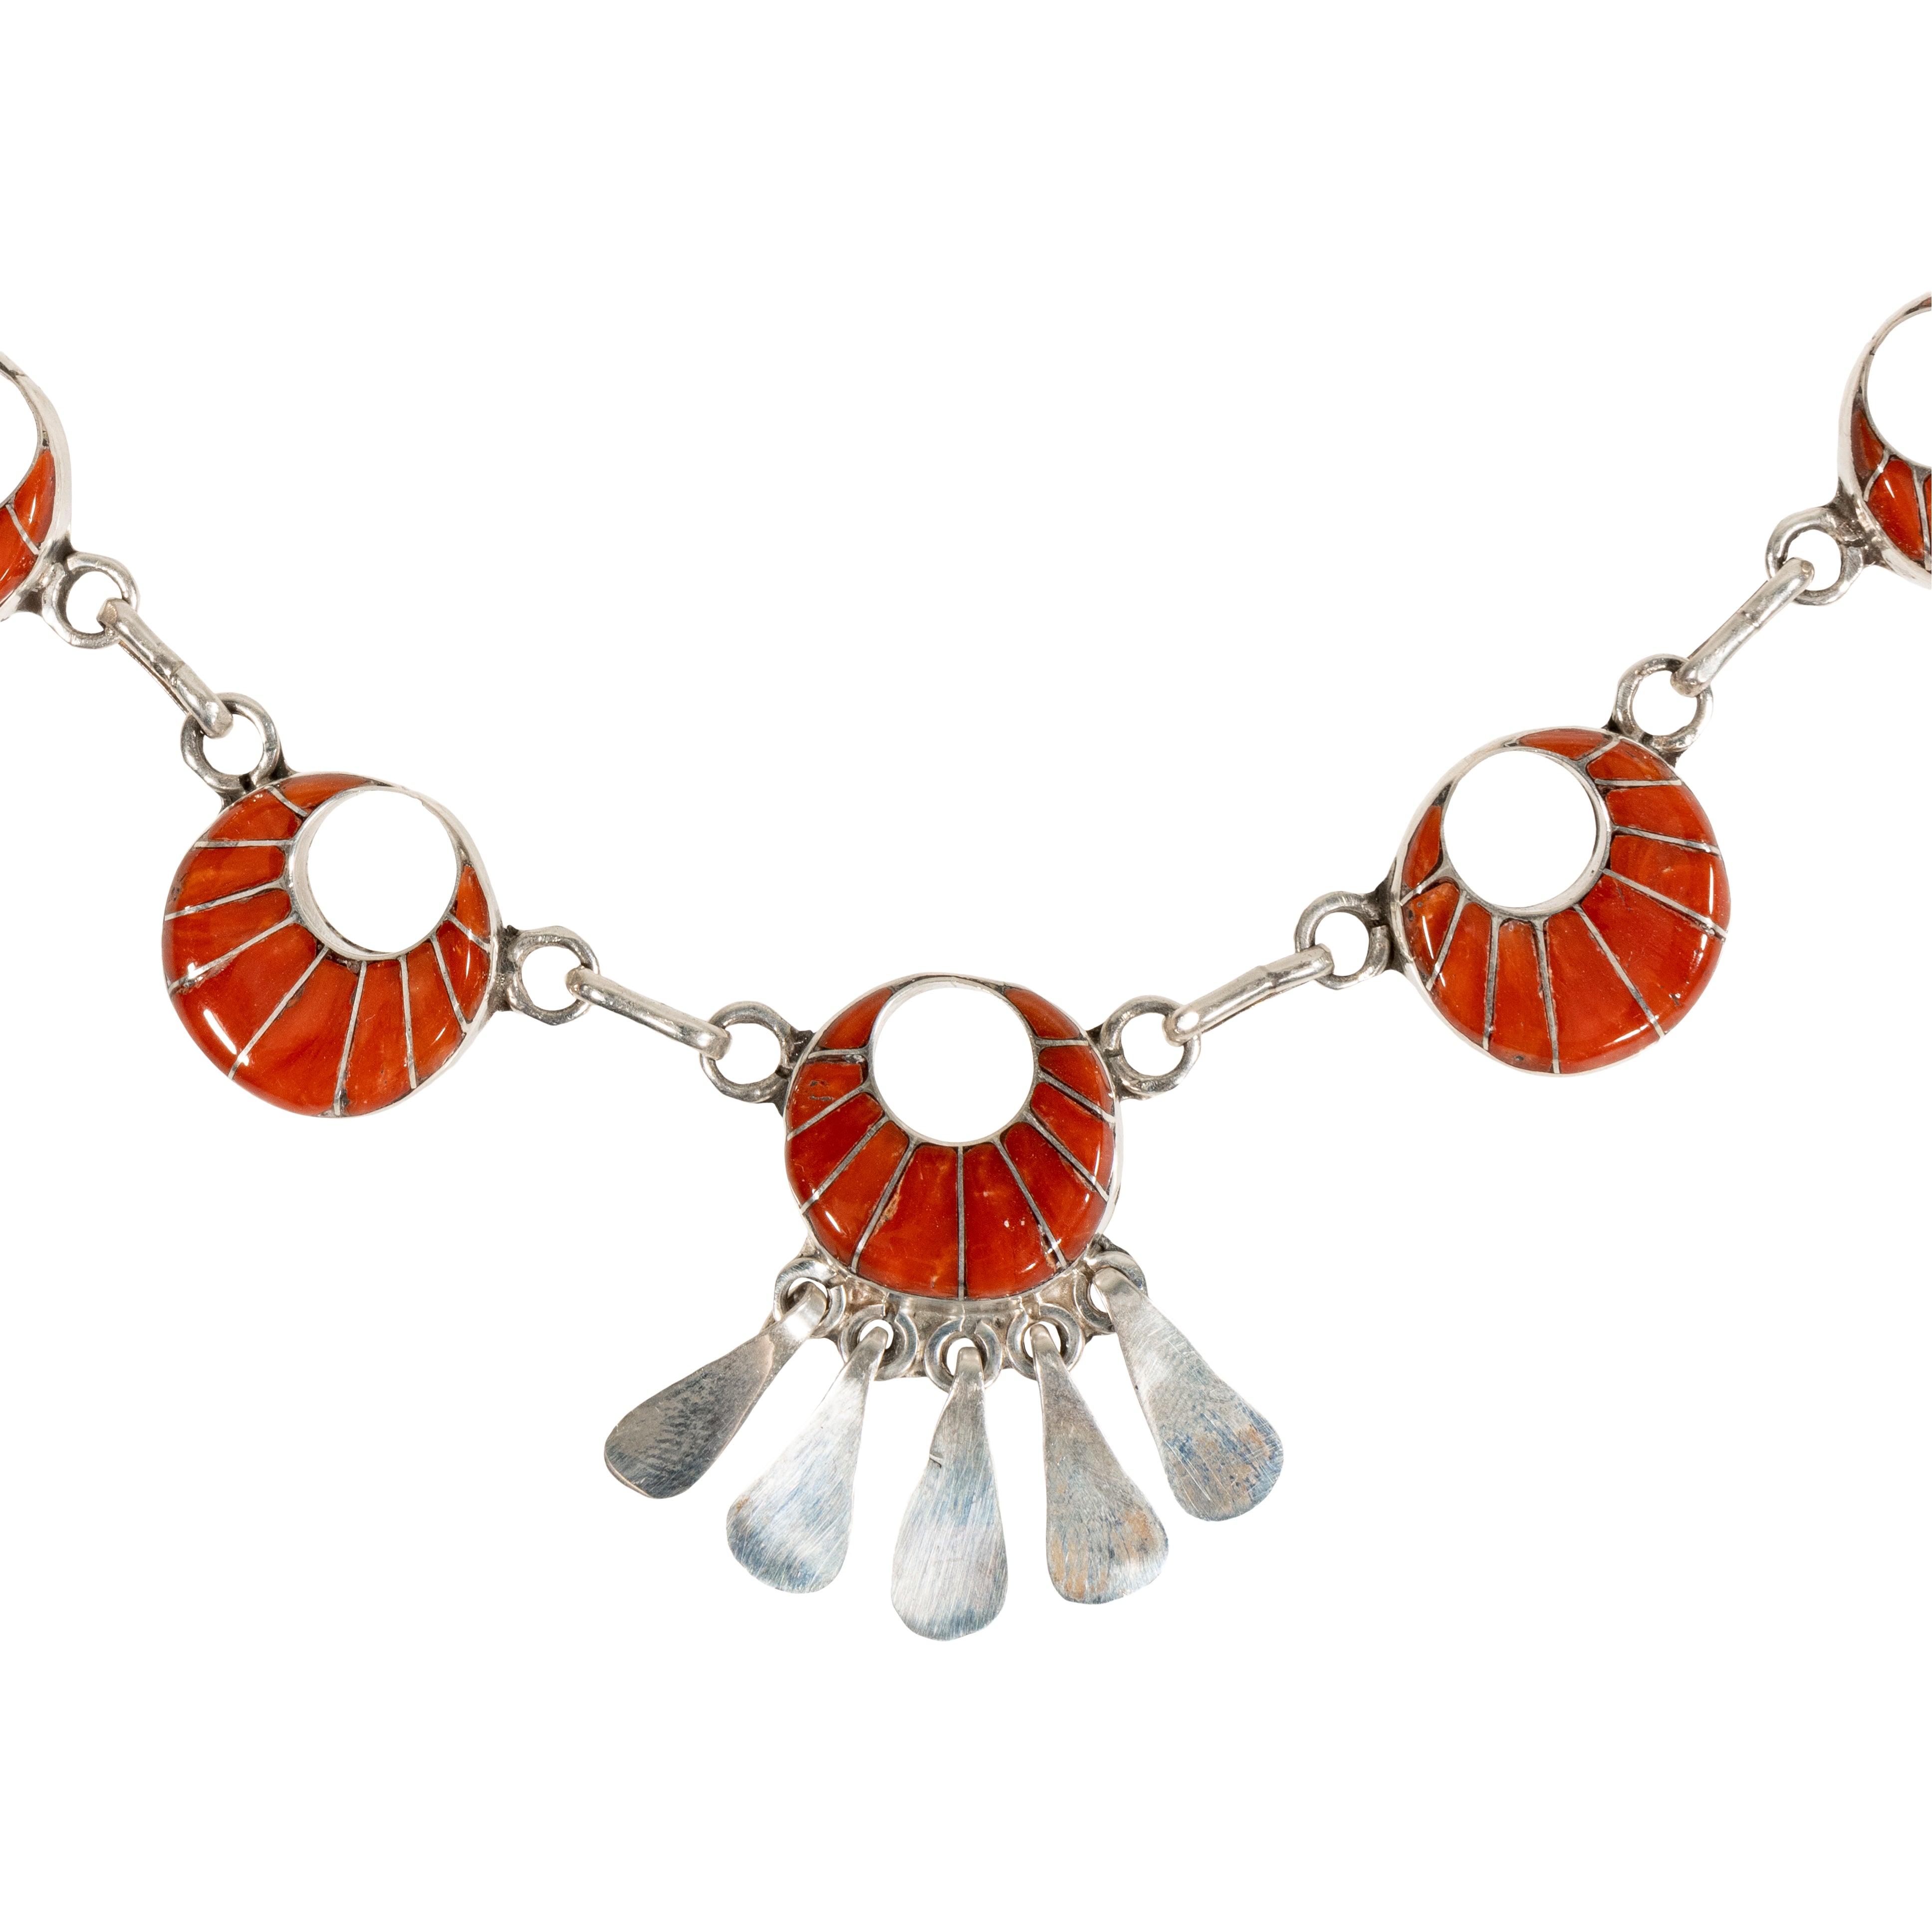 Zuni Coral Necklace and Earrings